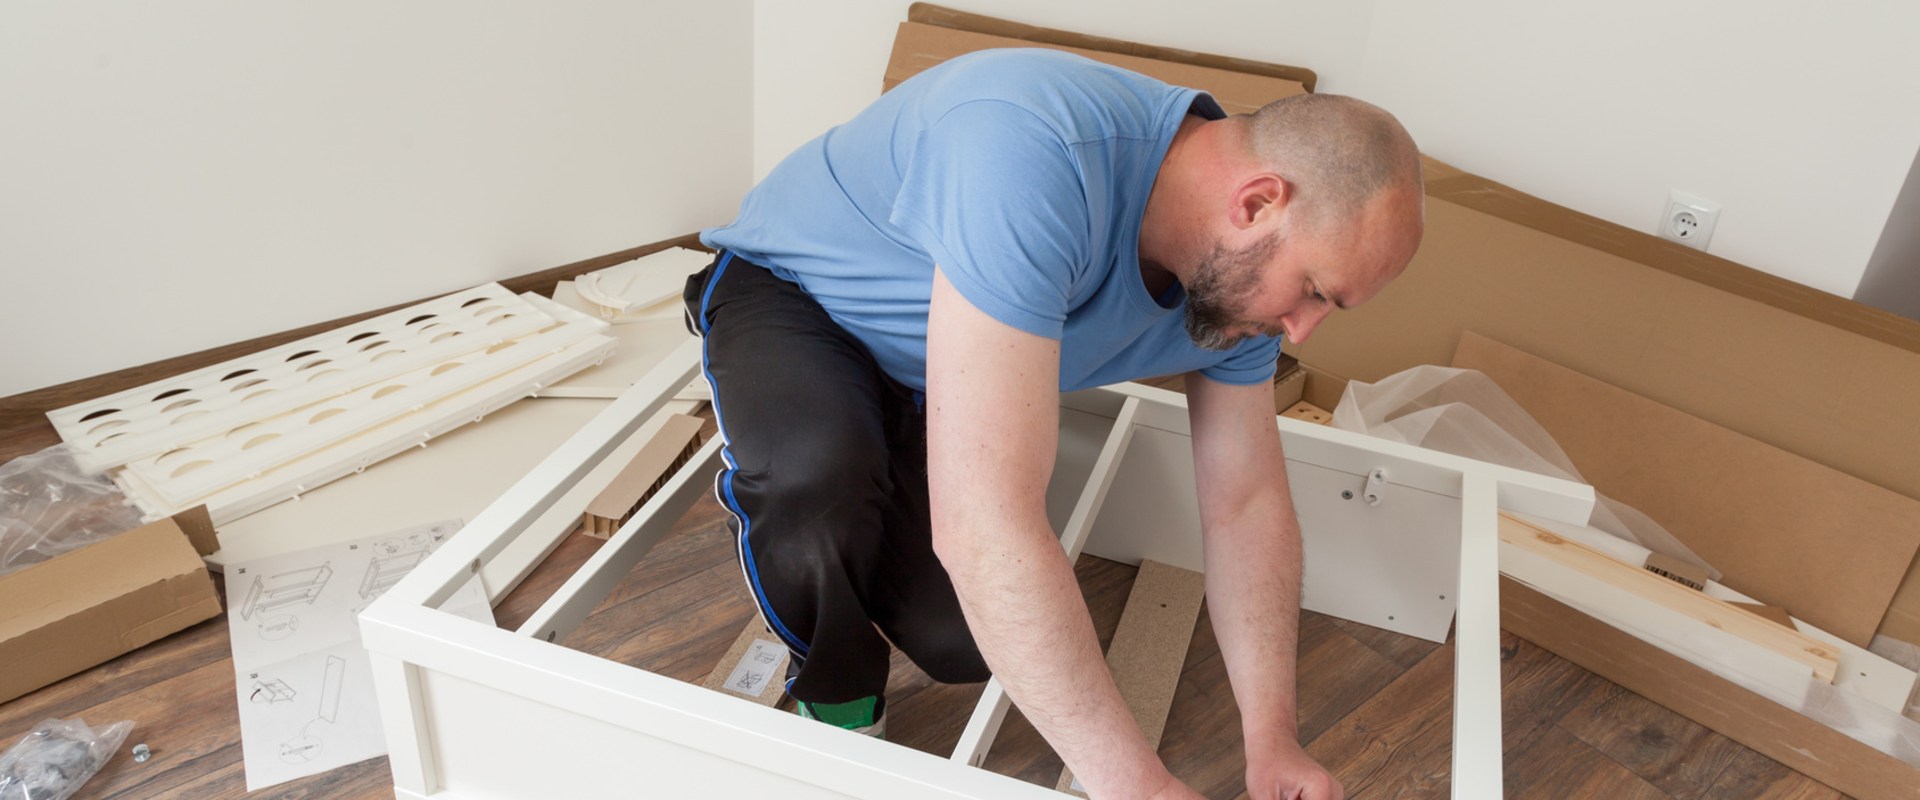 Do you have to disassemble furniture before moving?